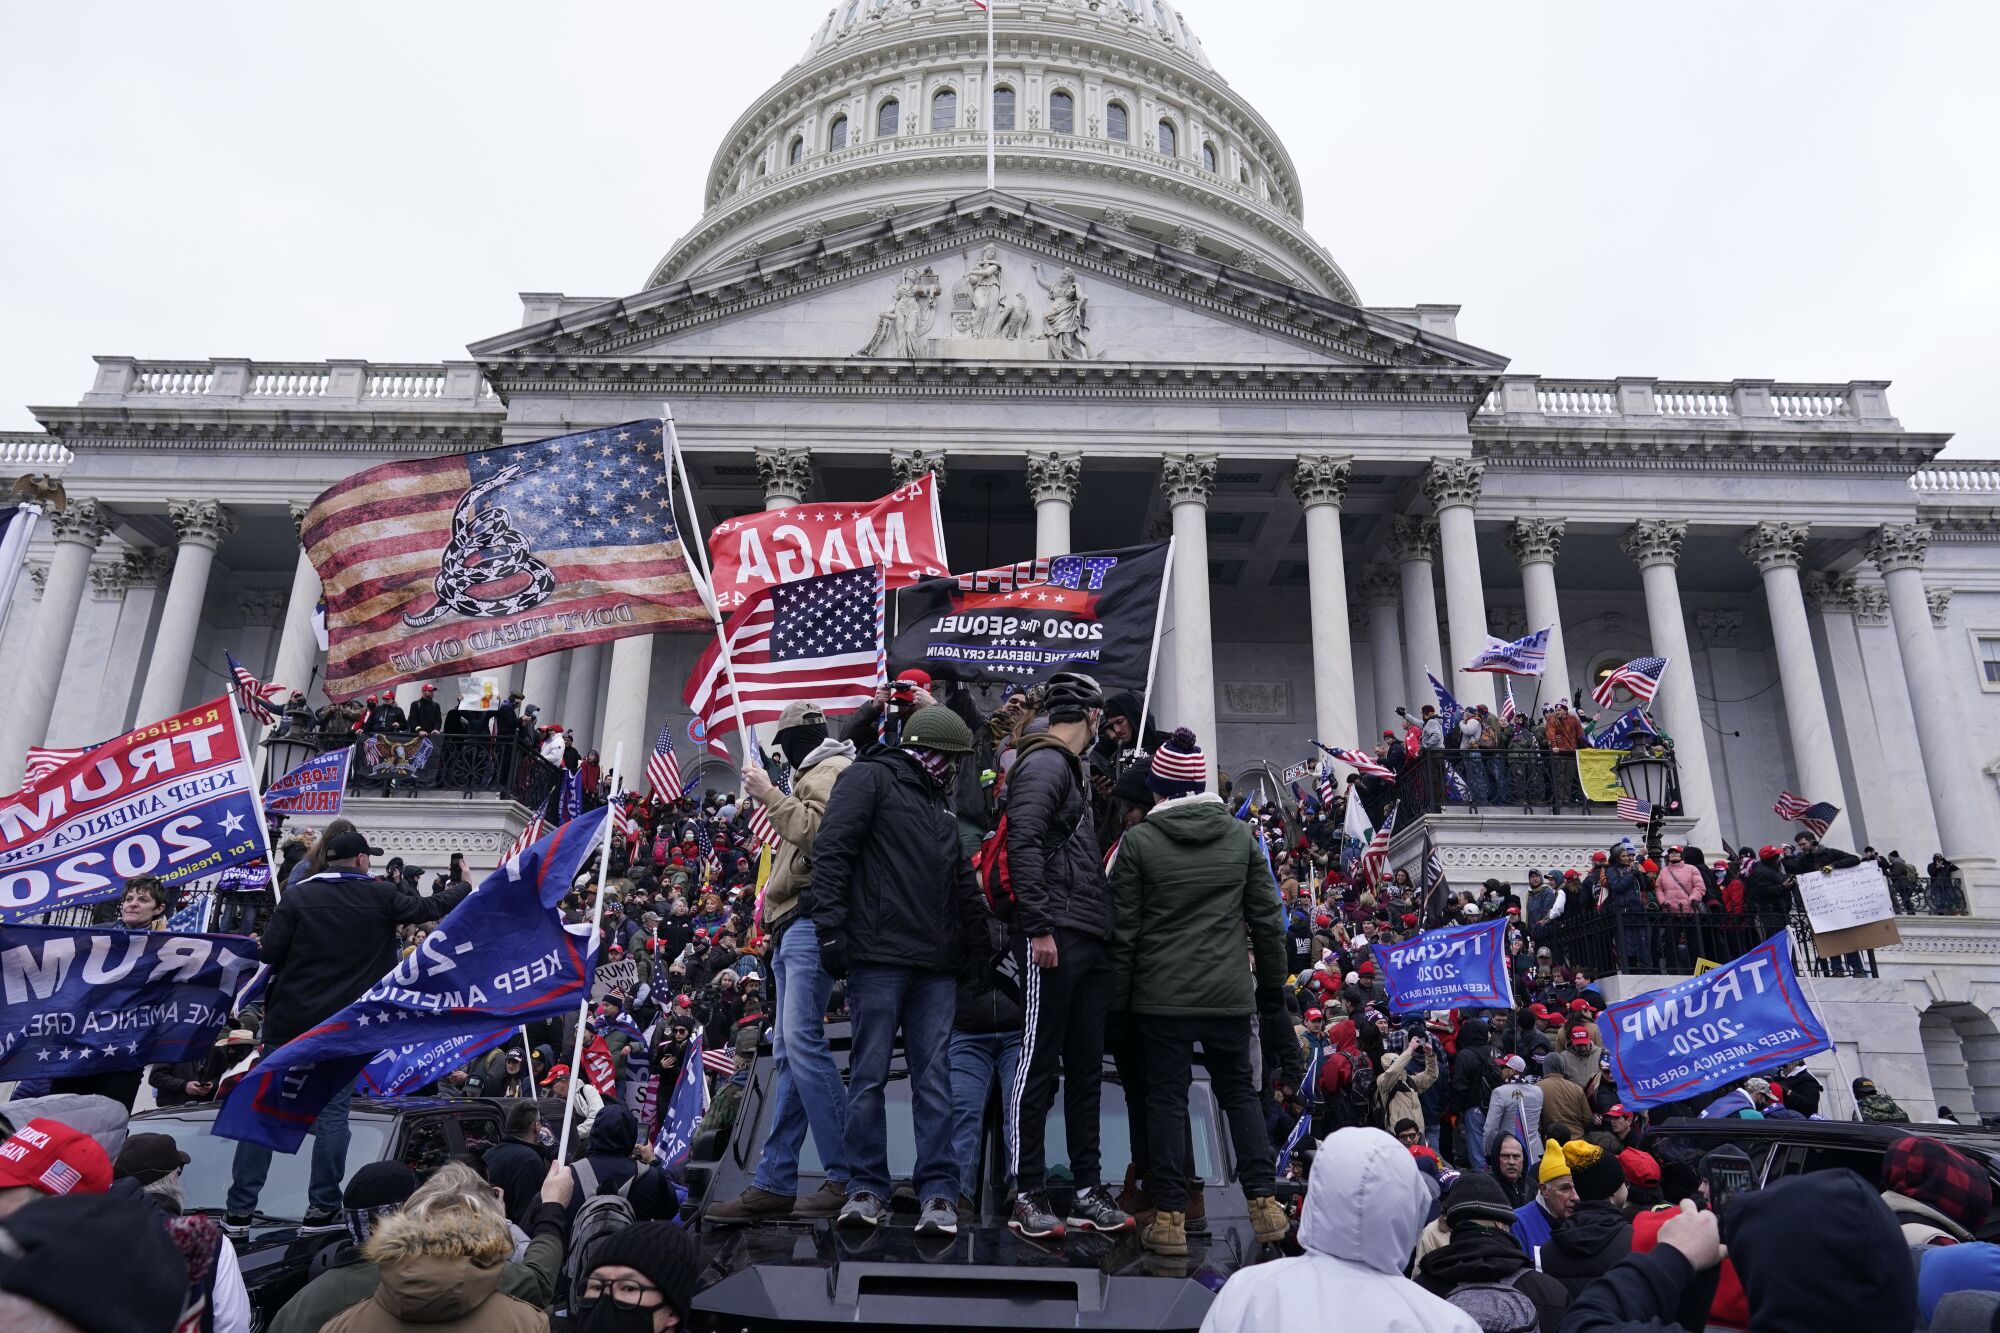 Trump supporters outside the U.S. Capitol on Jan. 6